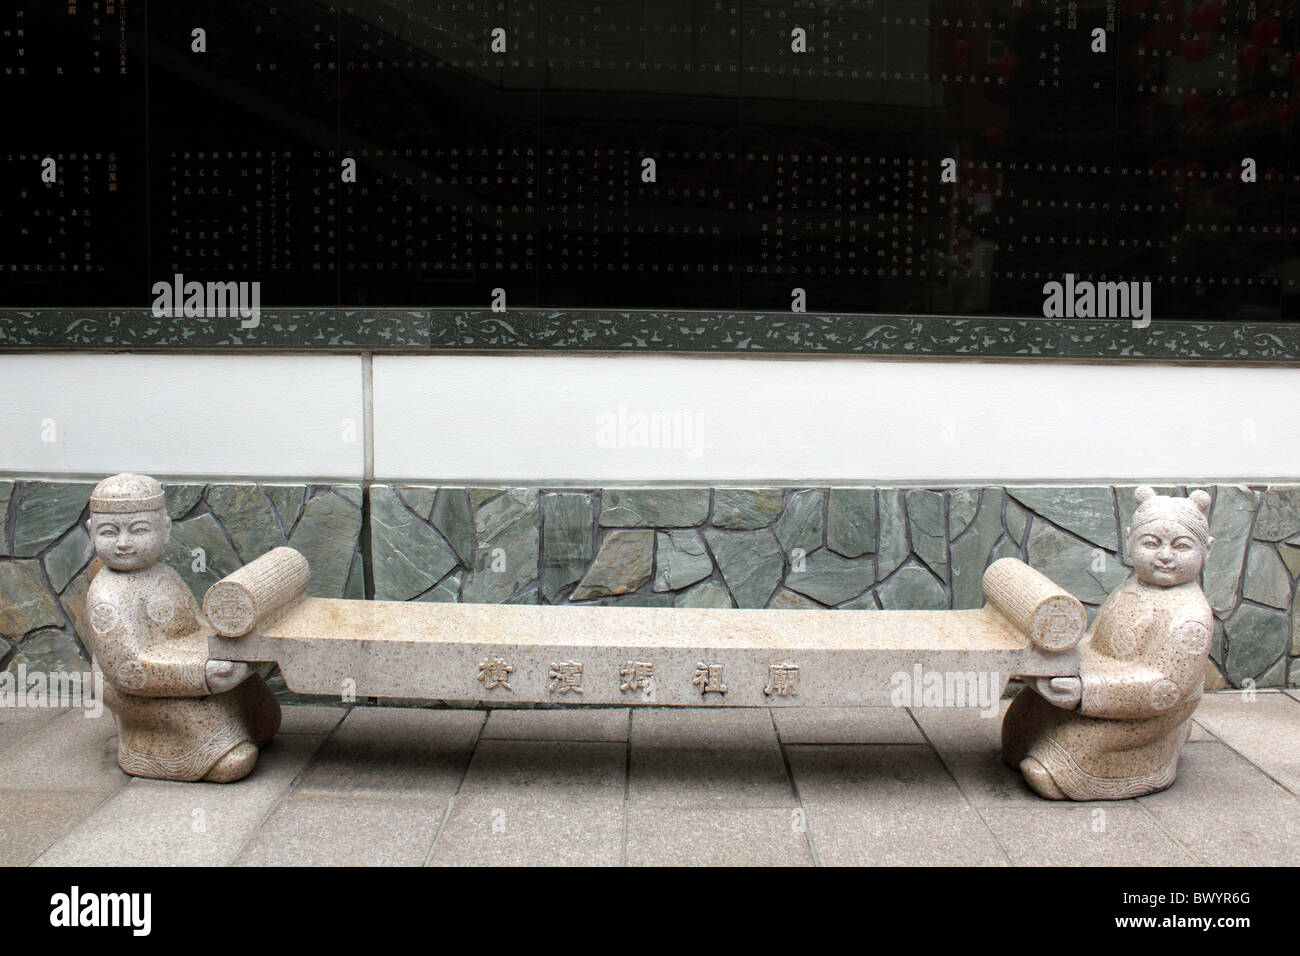 Chinese stone bench supported by carved human figures of boy and girl; behind is black stone with Chinese characters or writing Stock Photo